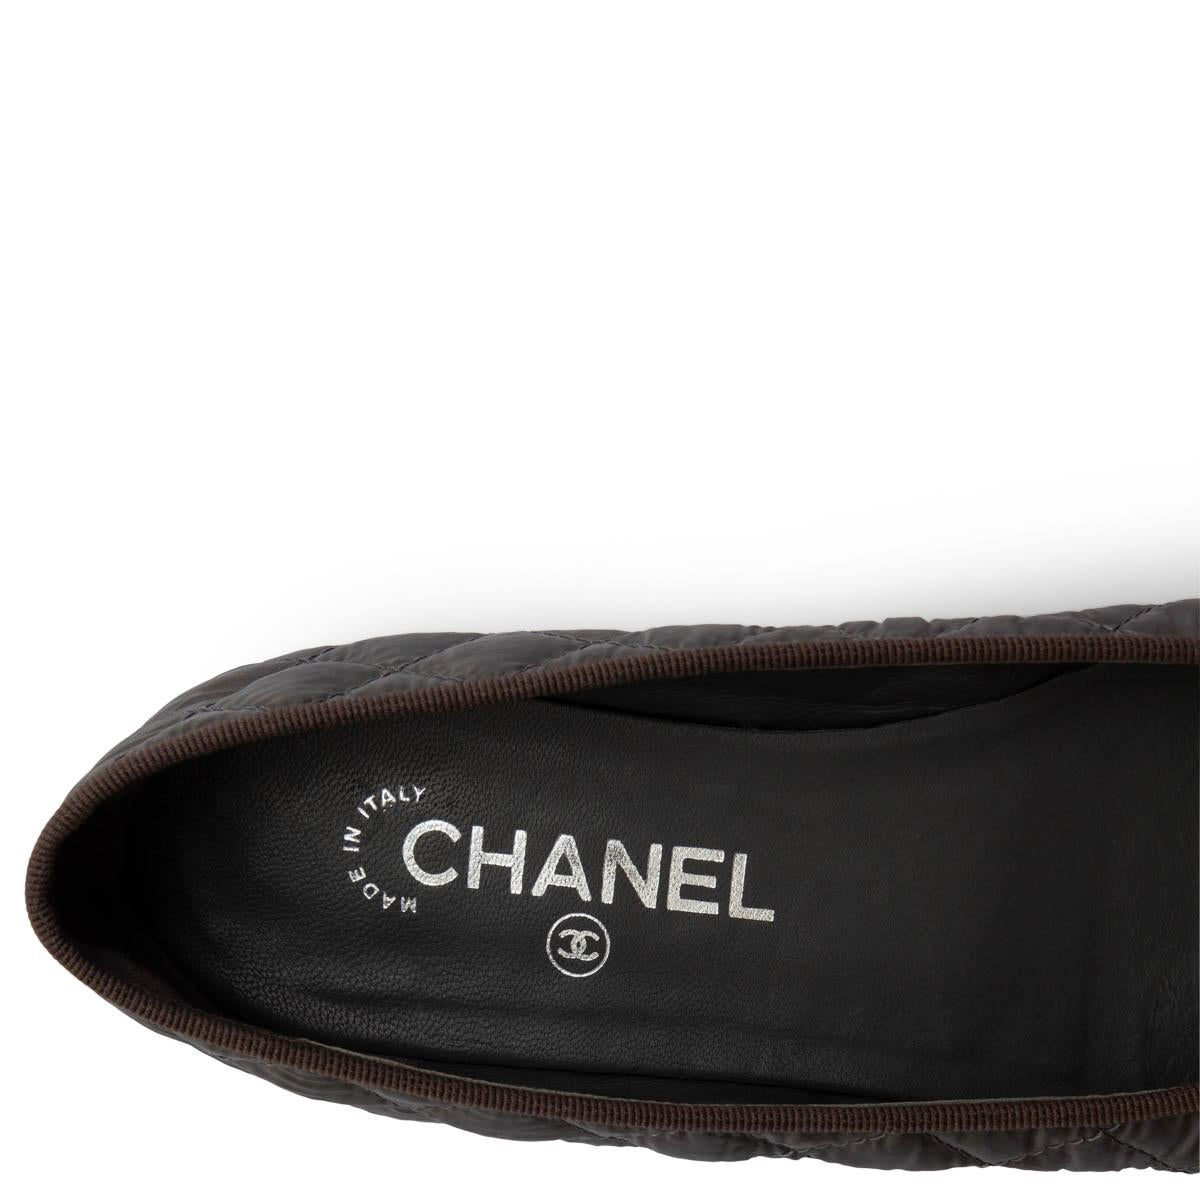 CHANEL grey QUILTED nylon 2011 11A Ballet Flats Shoes 38.5 3